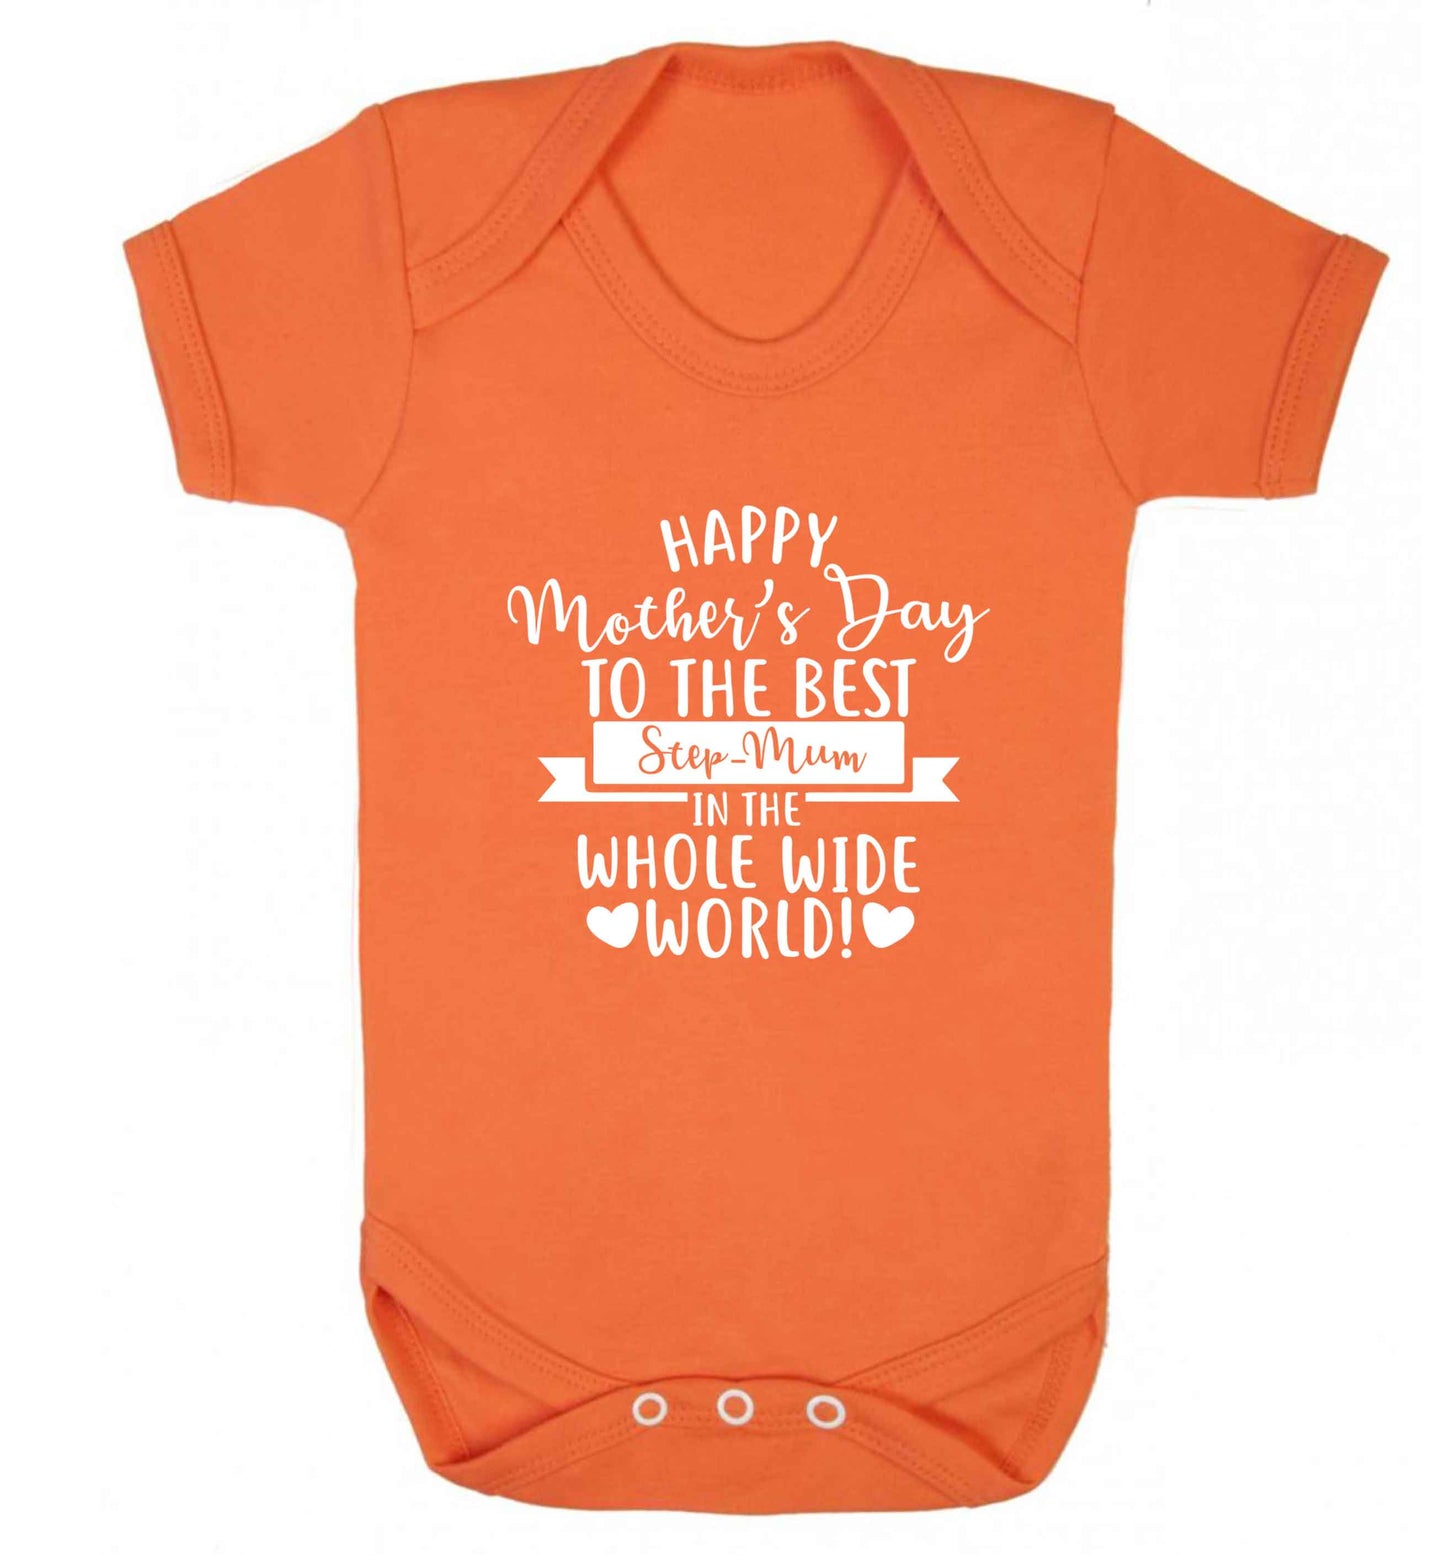 Happy mother's day to the best step-mum in the world baby vest orange 18-24 months